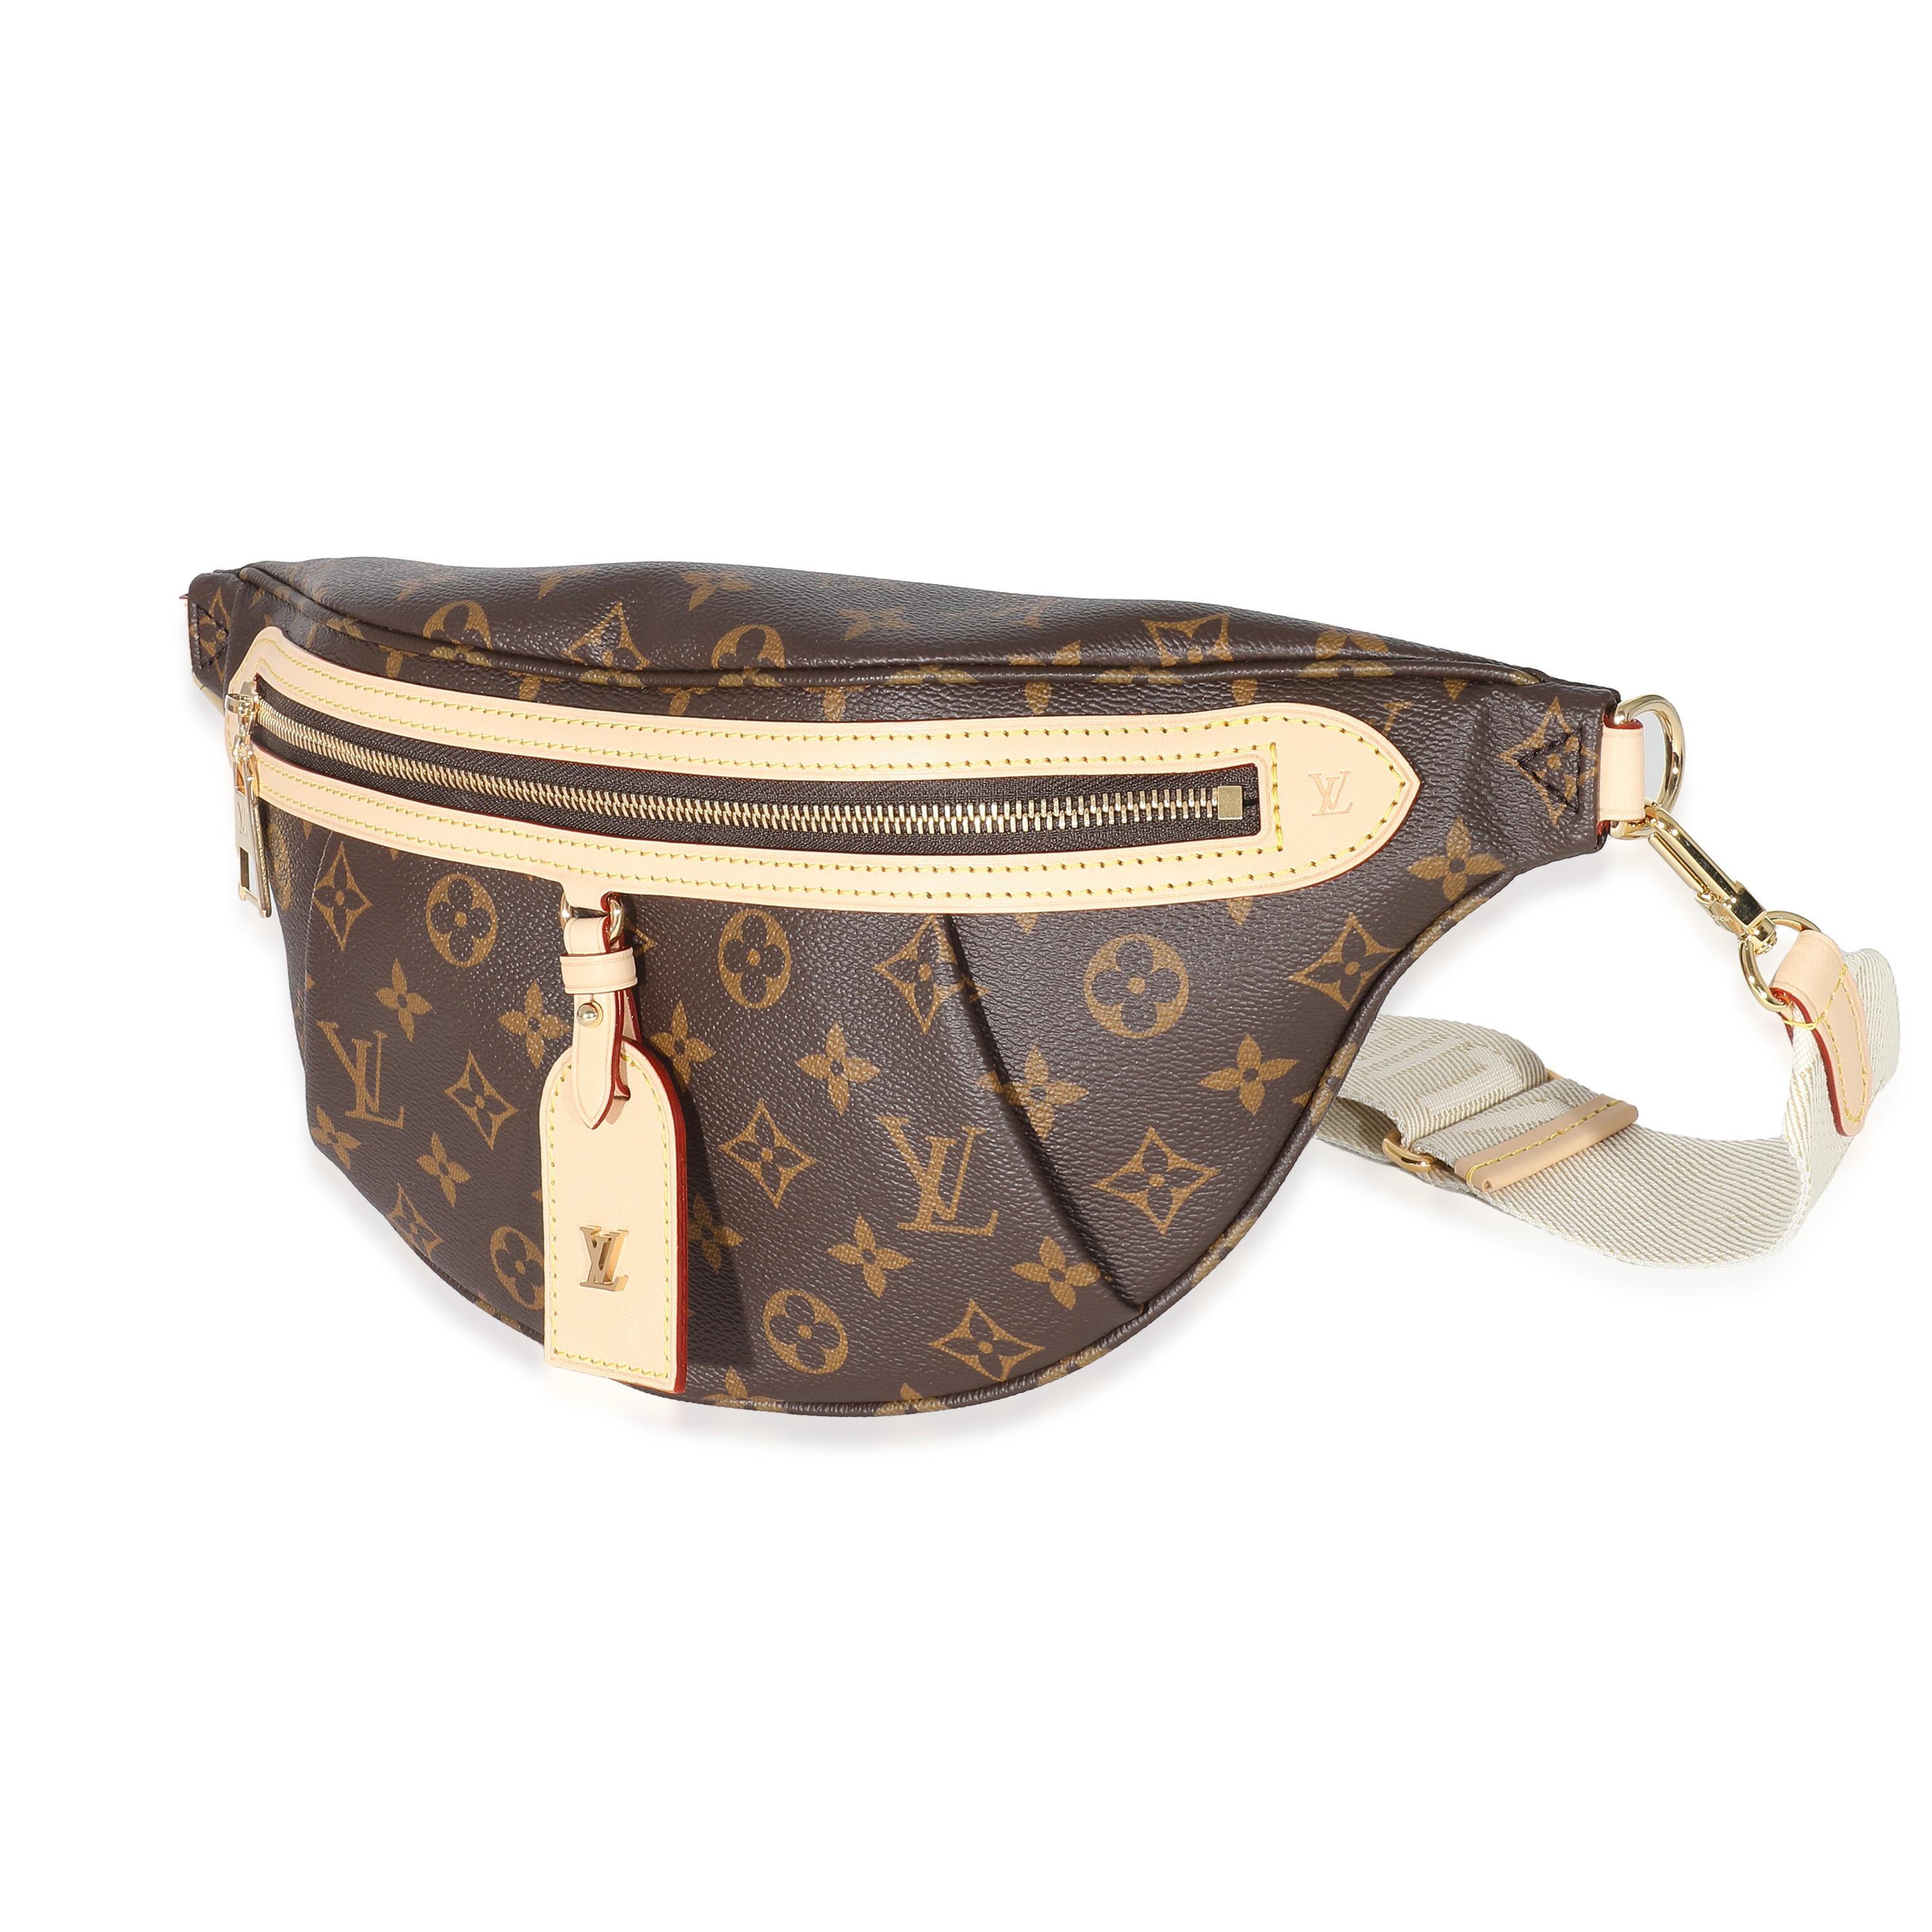 Louis Vuitton Monogram Highrise Bumbag In Excellent Condition For Sale In New York, NY